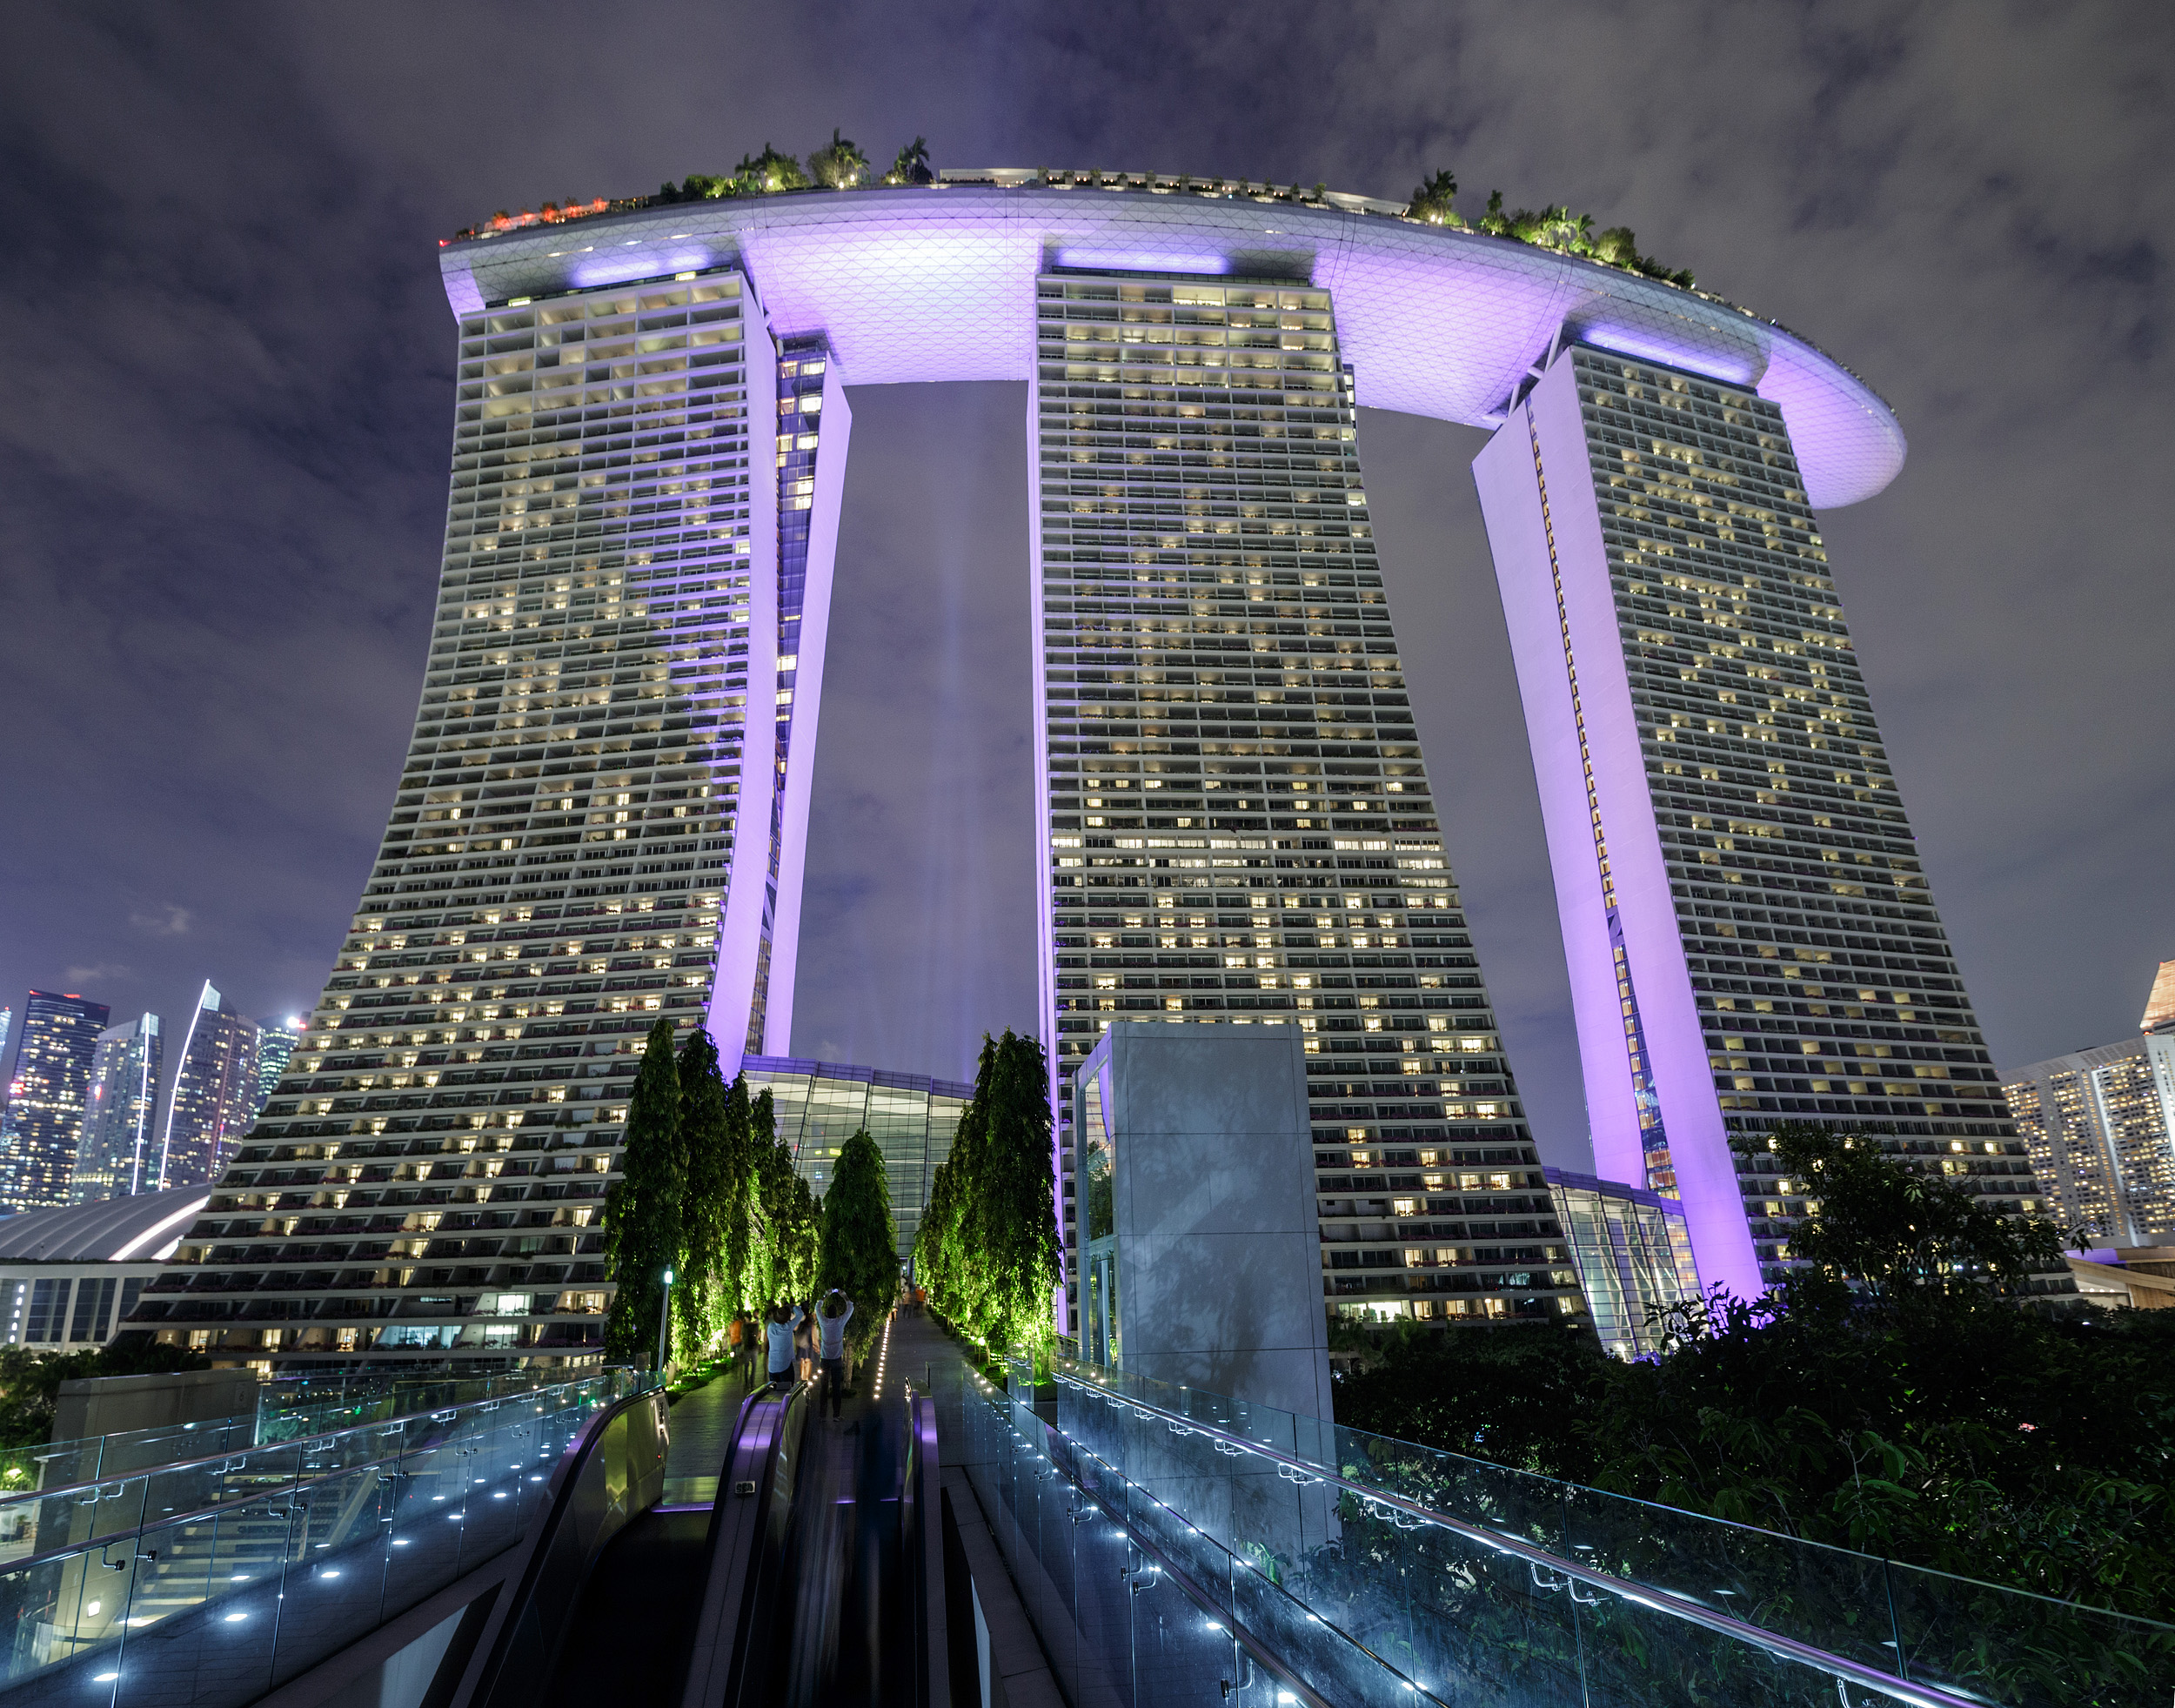 Marina Bay Sands Hotel, Singapore - View from the east. © Mathias Beinling